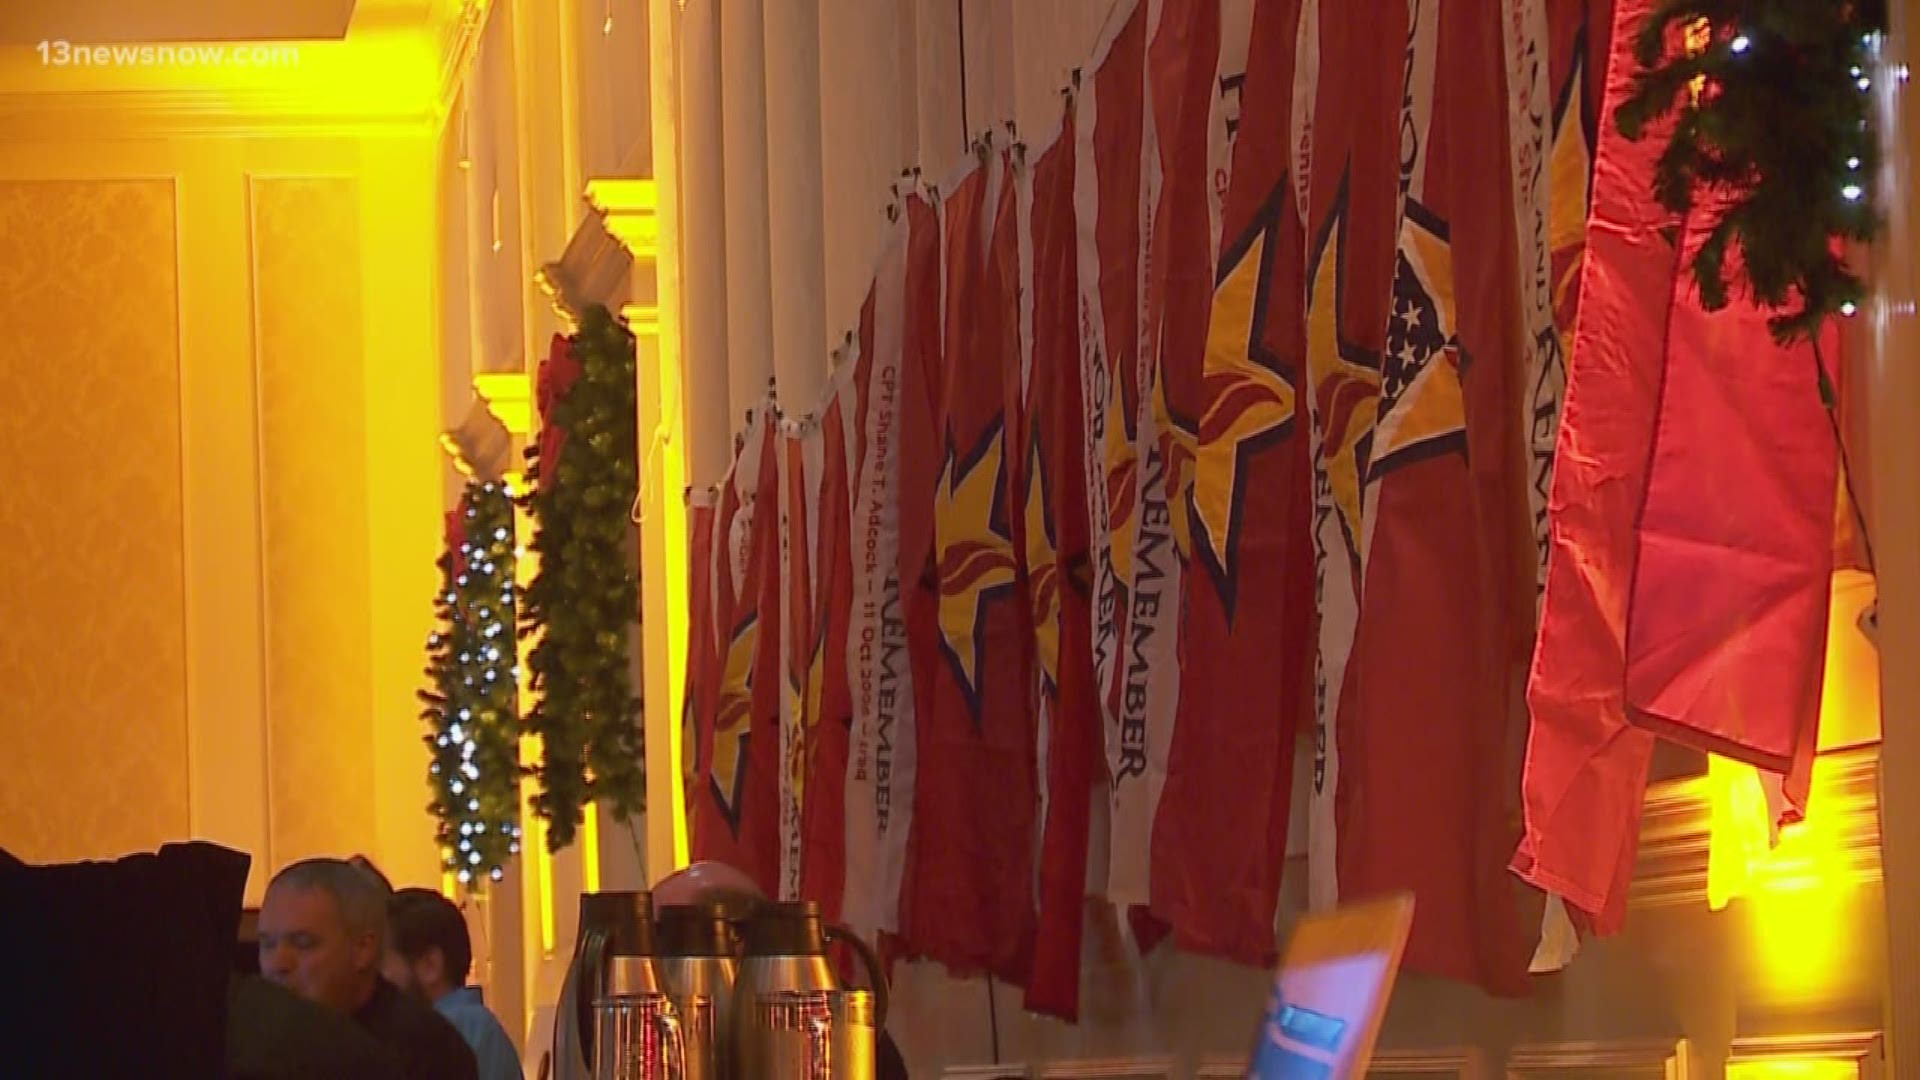 During the 10th Annual Gold Star Family Evening, families honored fallen military heroes who lost their lives while serving the country.